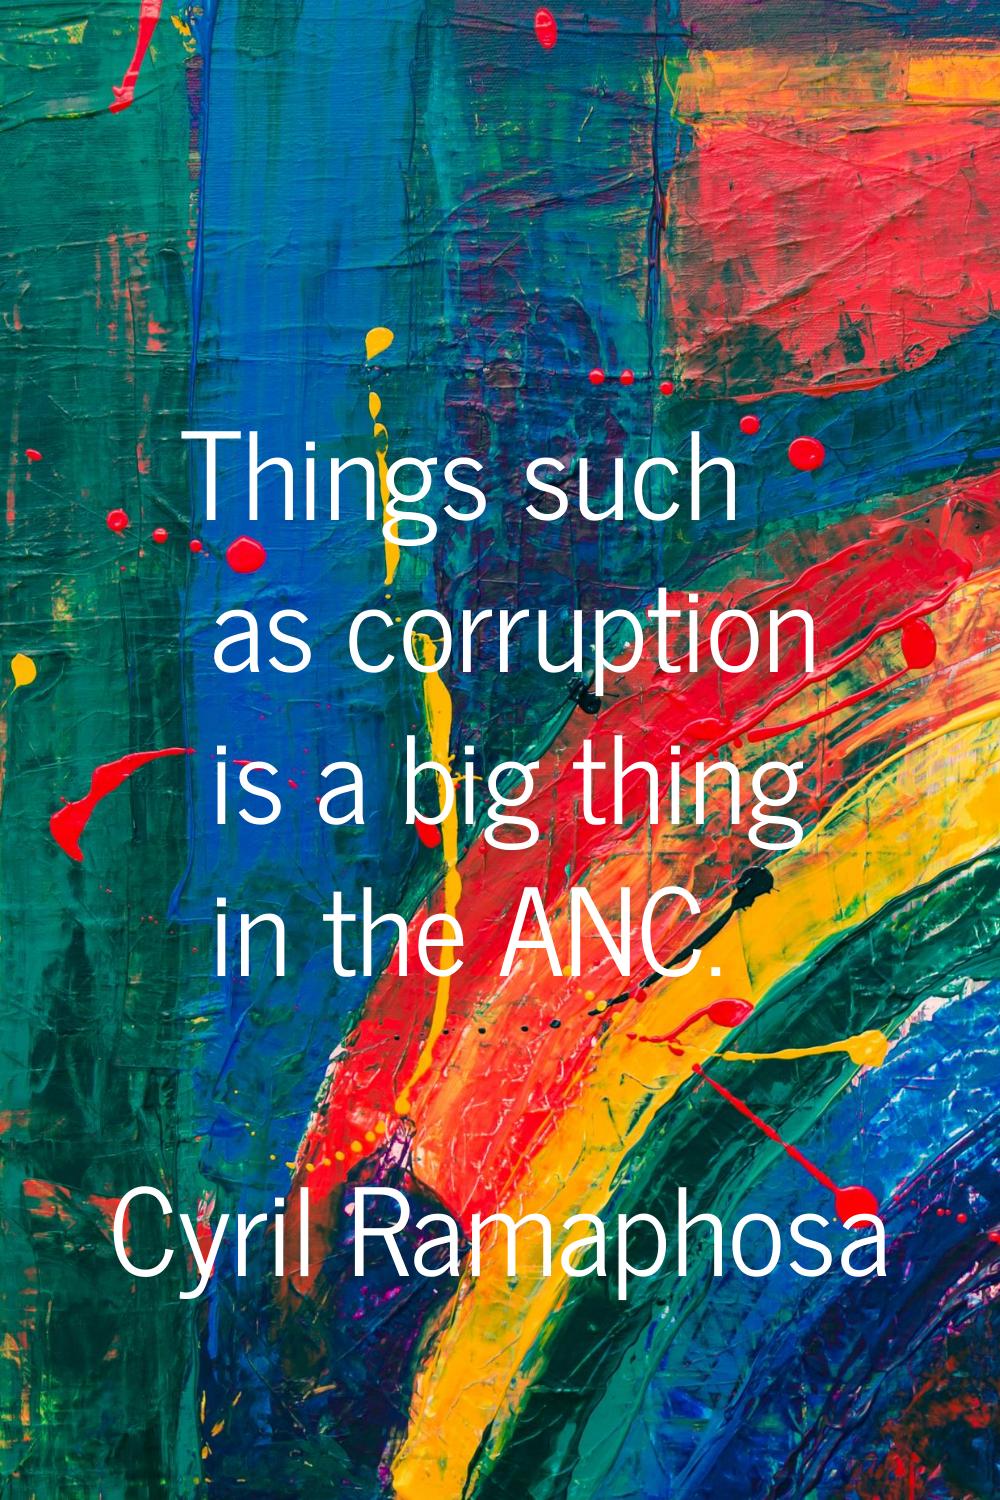 Things such as corruption is a big thing in the ANC.